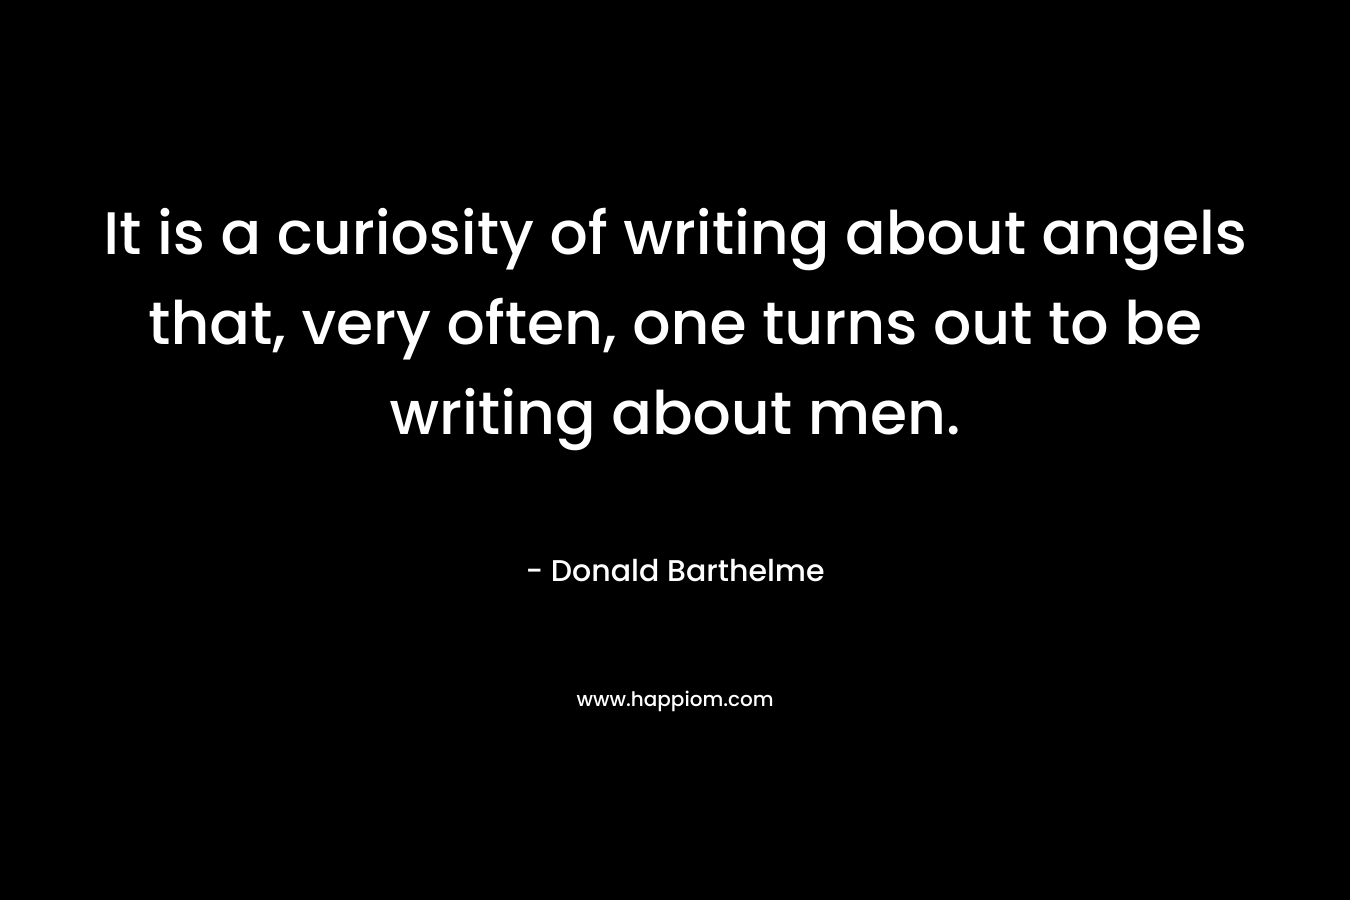 It is a curiosity of writing about angels that, very often, one turns out to be writing about men. – Donald Barthelme